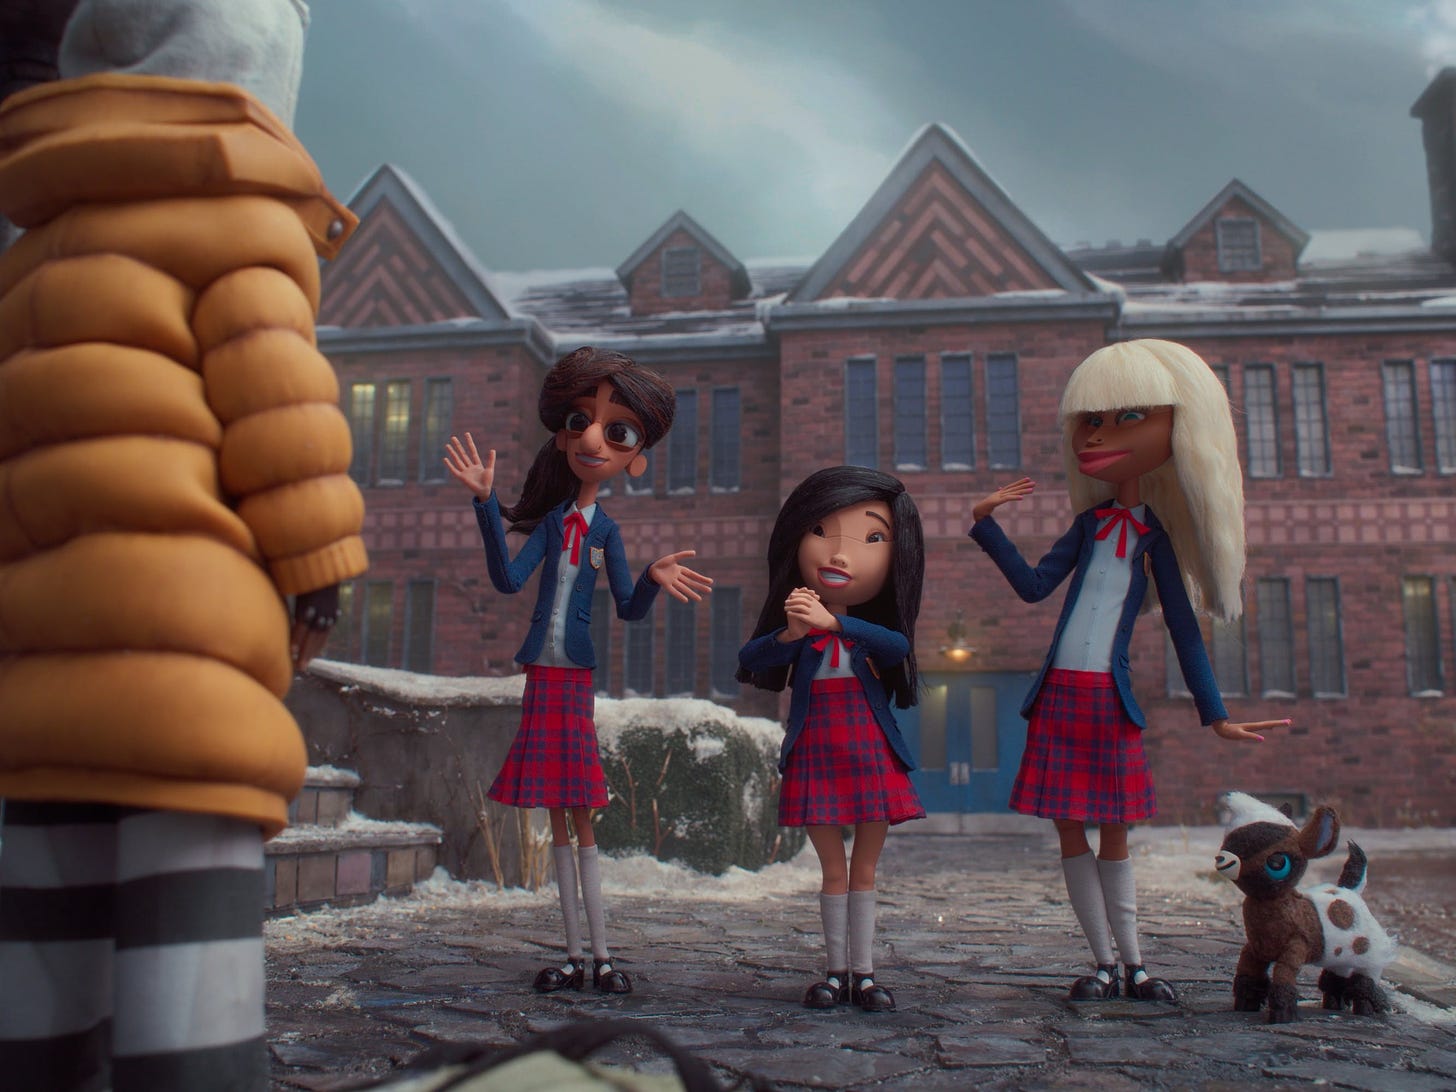 A still from Wendell & Wild, where we see Kat off to the left, facing a line of three peppy, prep-school girls, including Shiobhan on the right